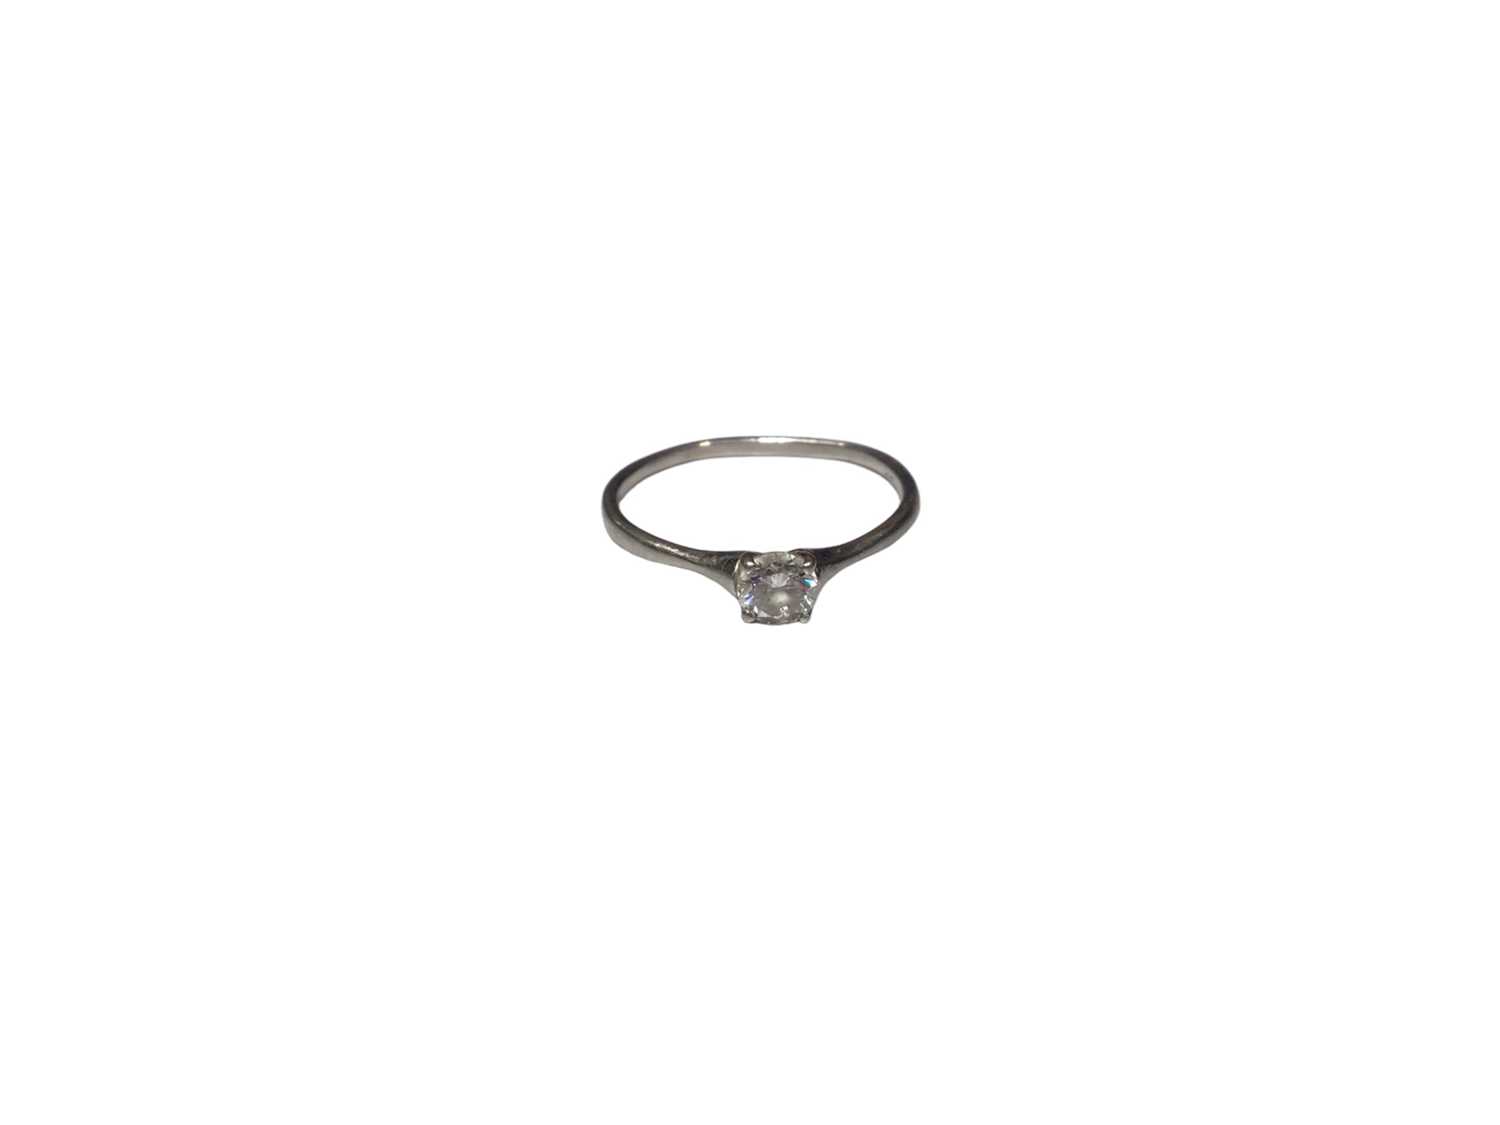 Lot 191 - Diamond single stone ring, with a brilliant cut diamond estimated to weigh approximately 0.30cts, in four claw setting on platinum shank